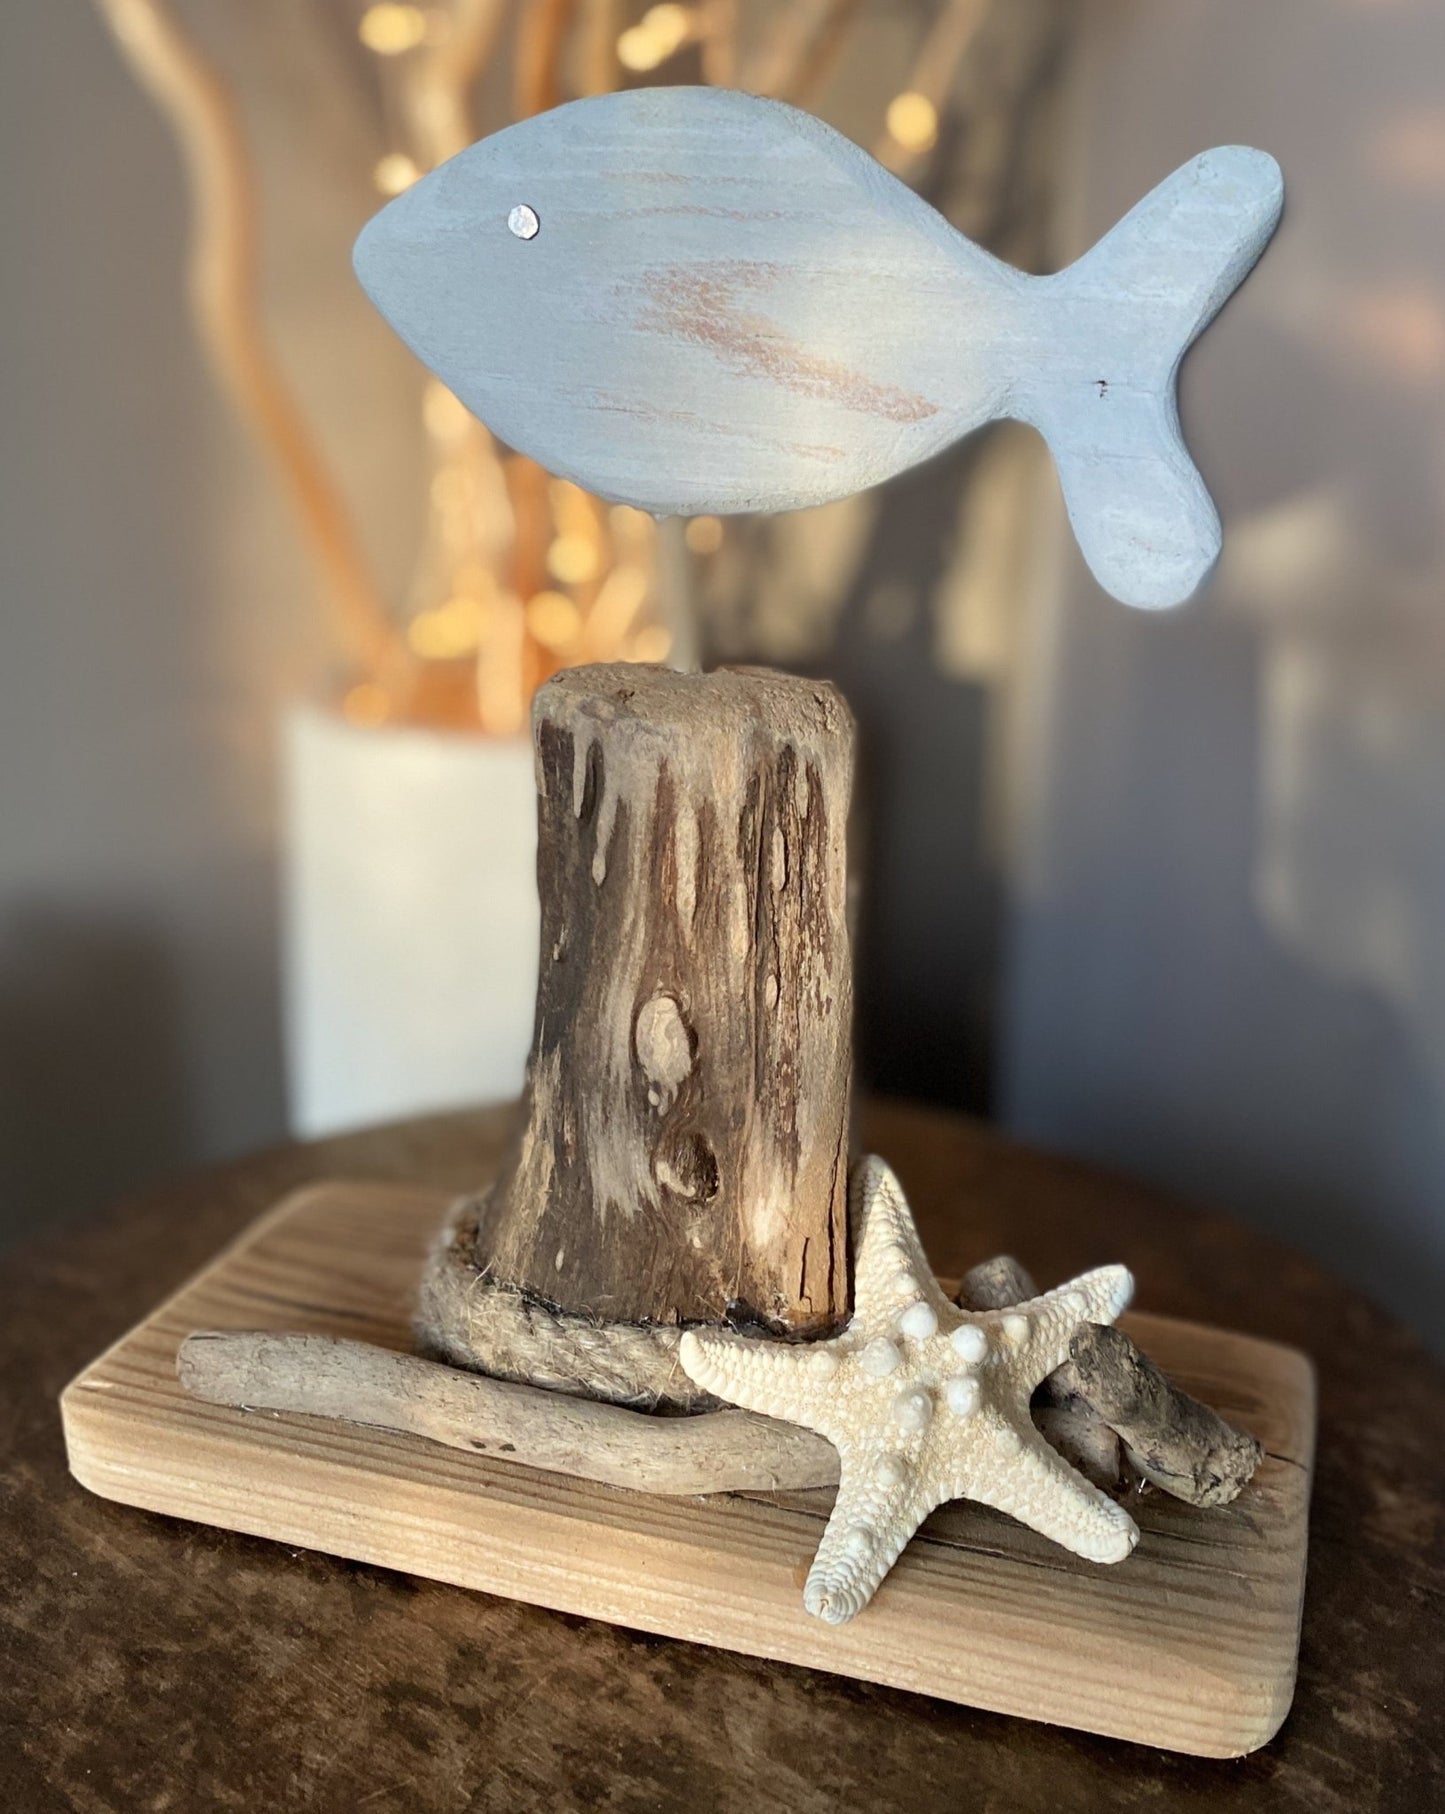 Driftwood Fish Home Decor with Starfish - Drift Craft by Jo